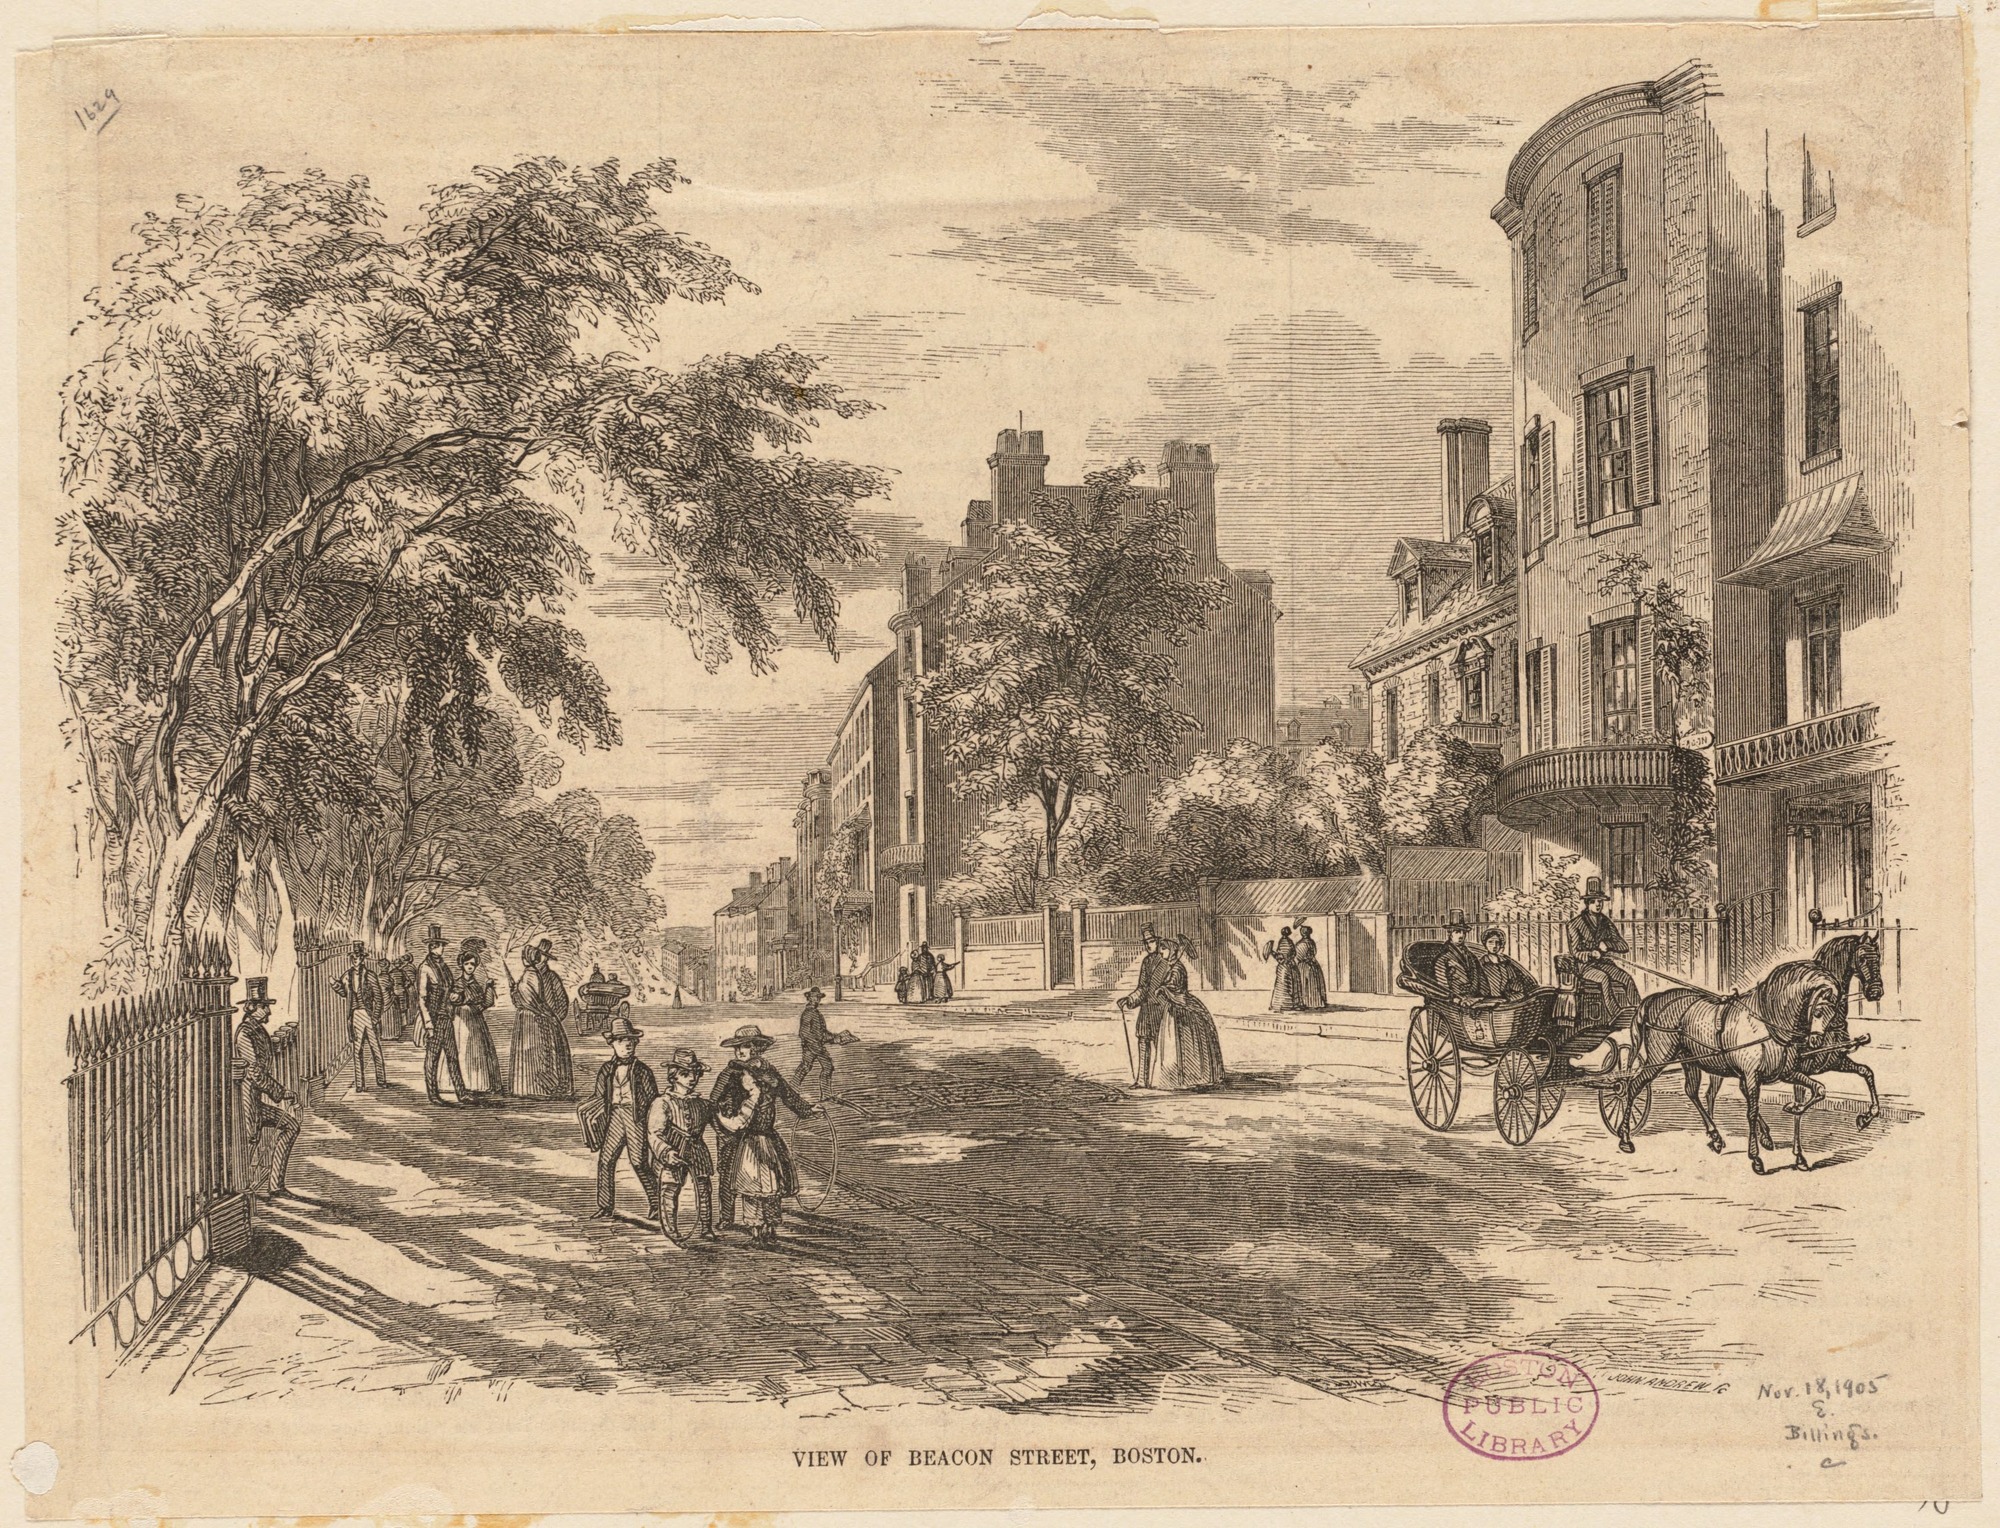 Drawing of a busy street with people walking, horse and carriage, buildings and trees in the background.